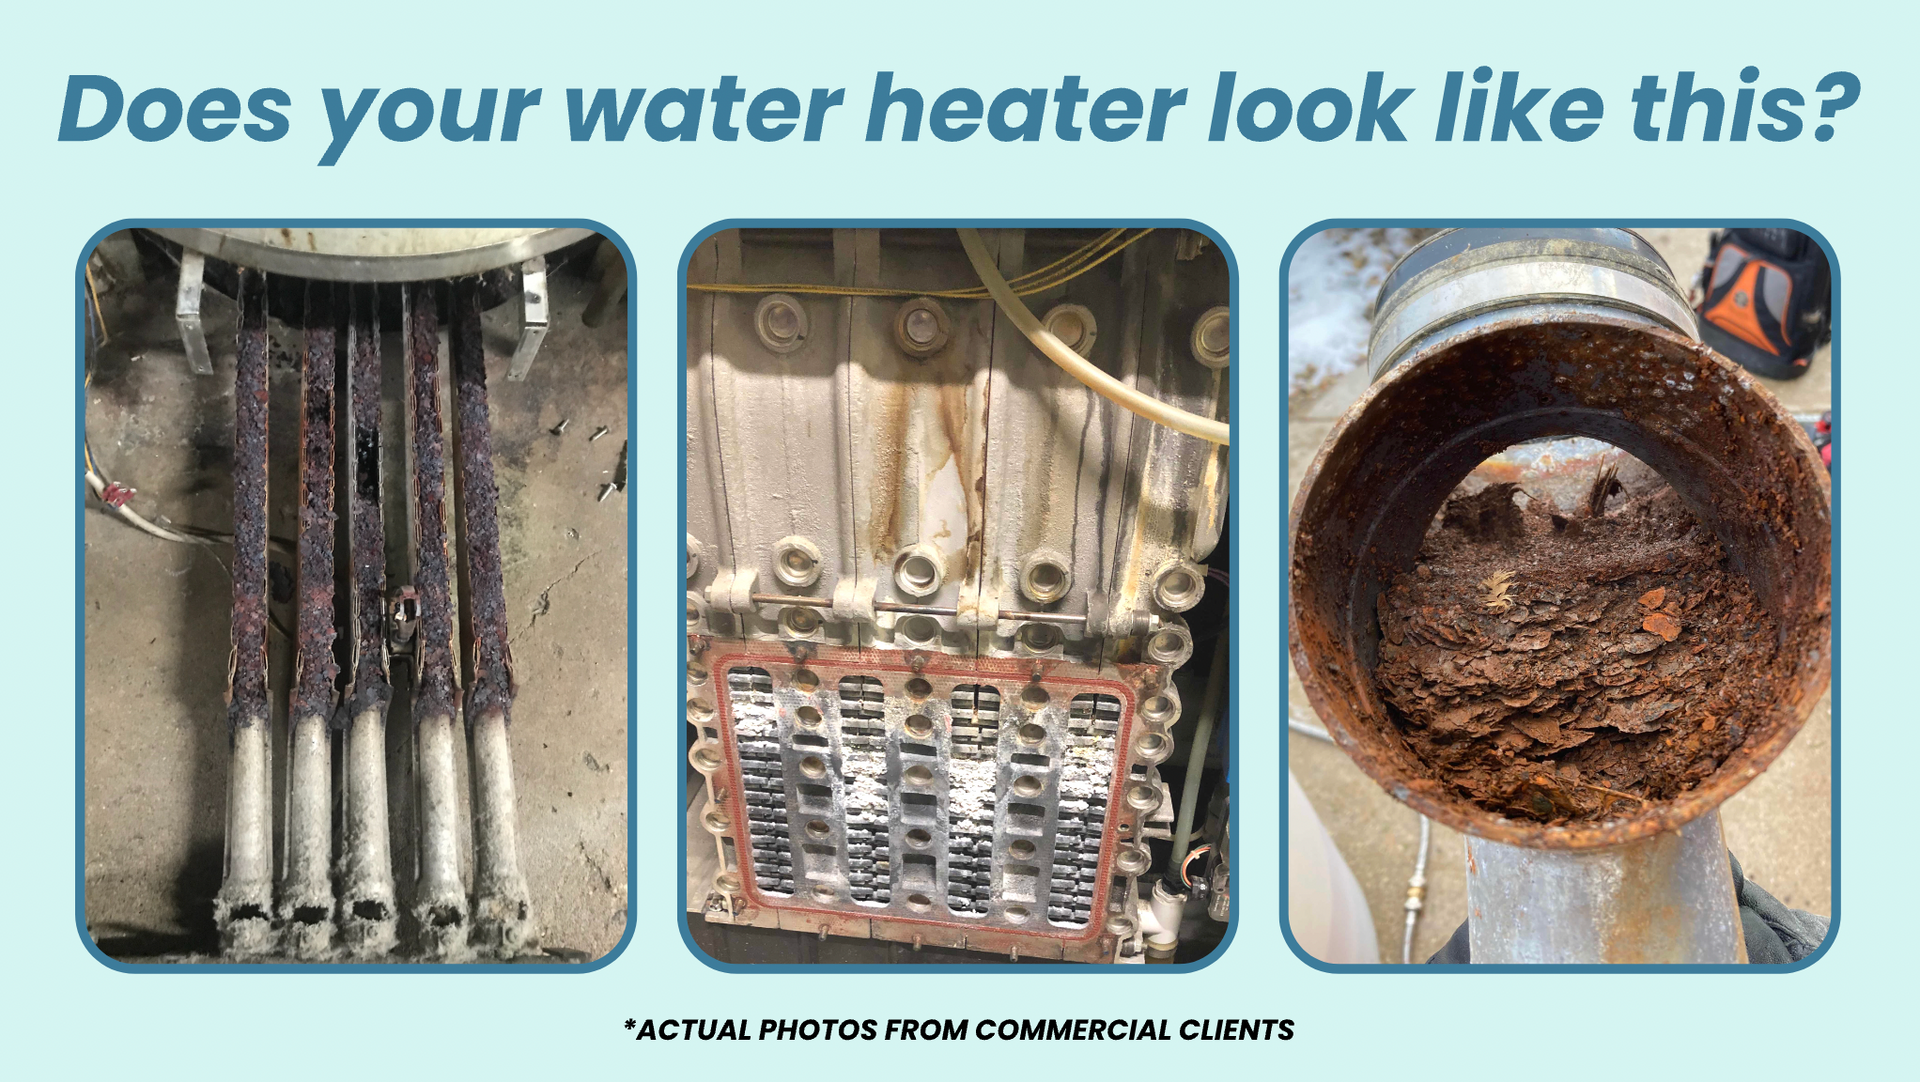 Do your water heater look like this? Water heaters in need of preventative maintenance: burner assembly filled with rust, boiler heat exchanger sediment, clogged exhaust condensate elbow